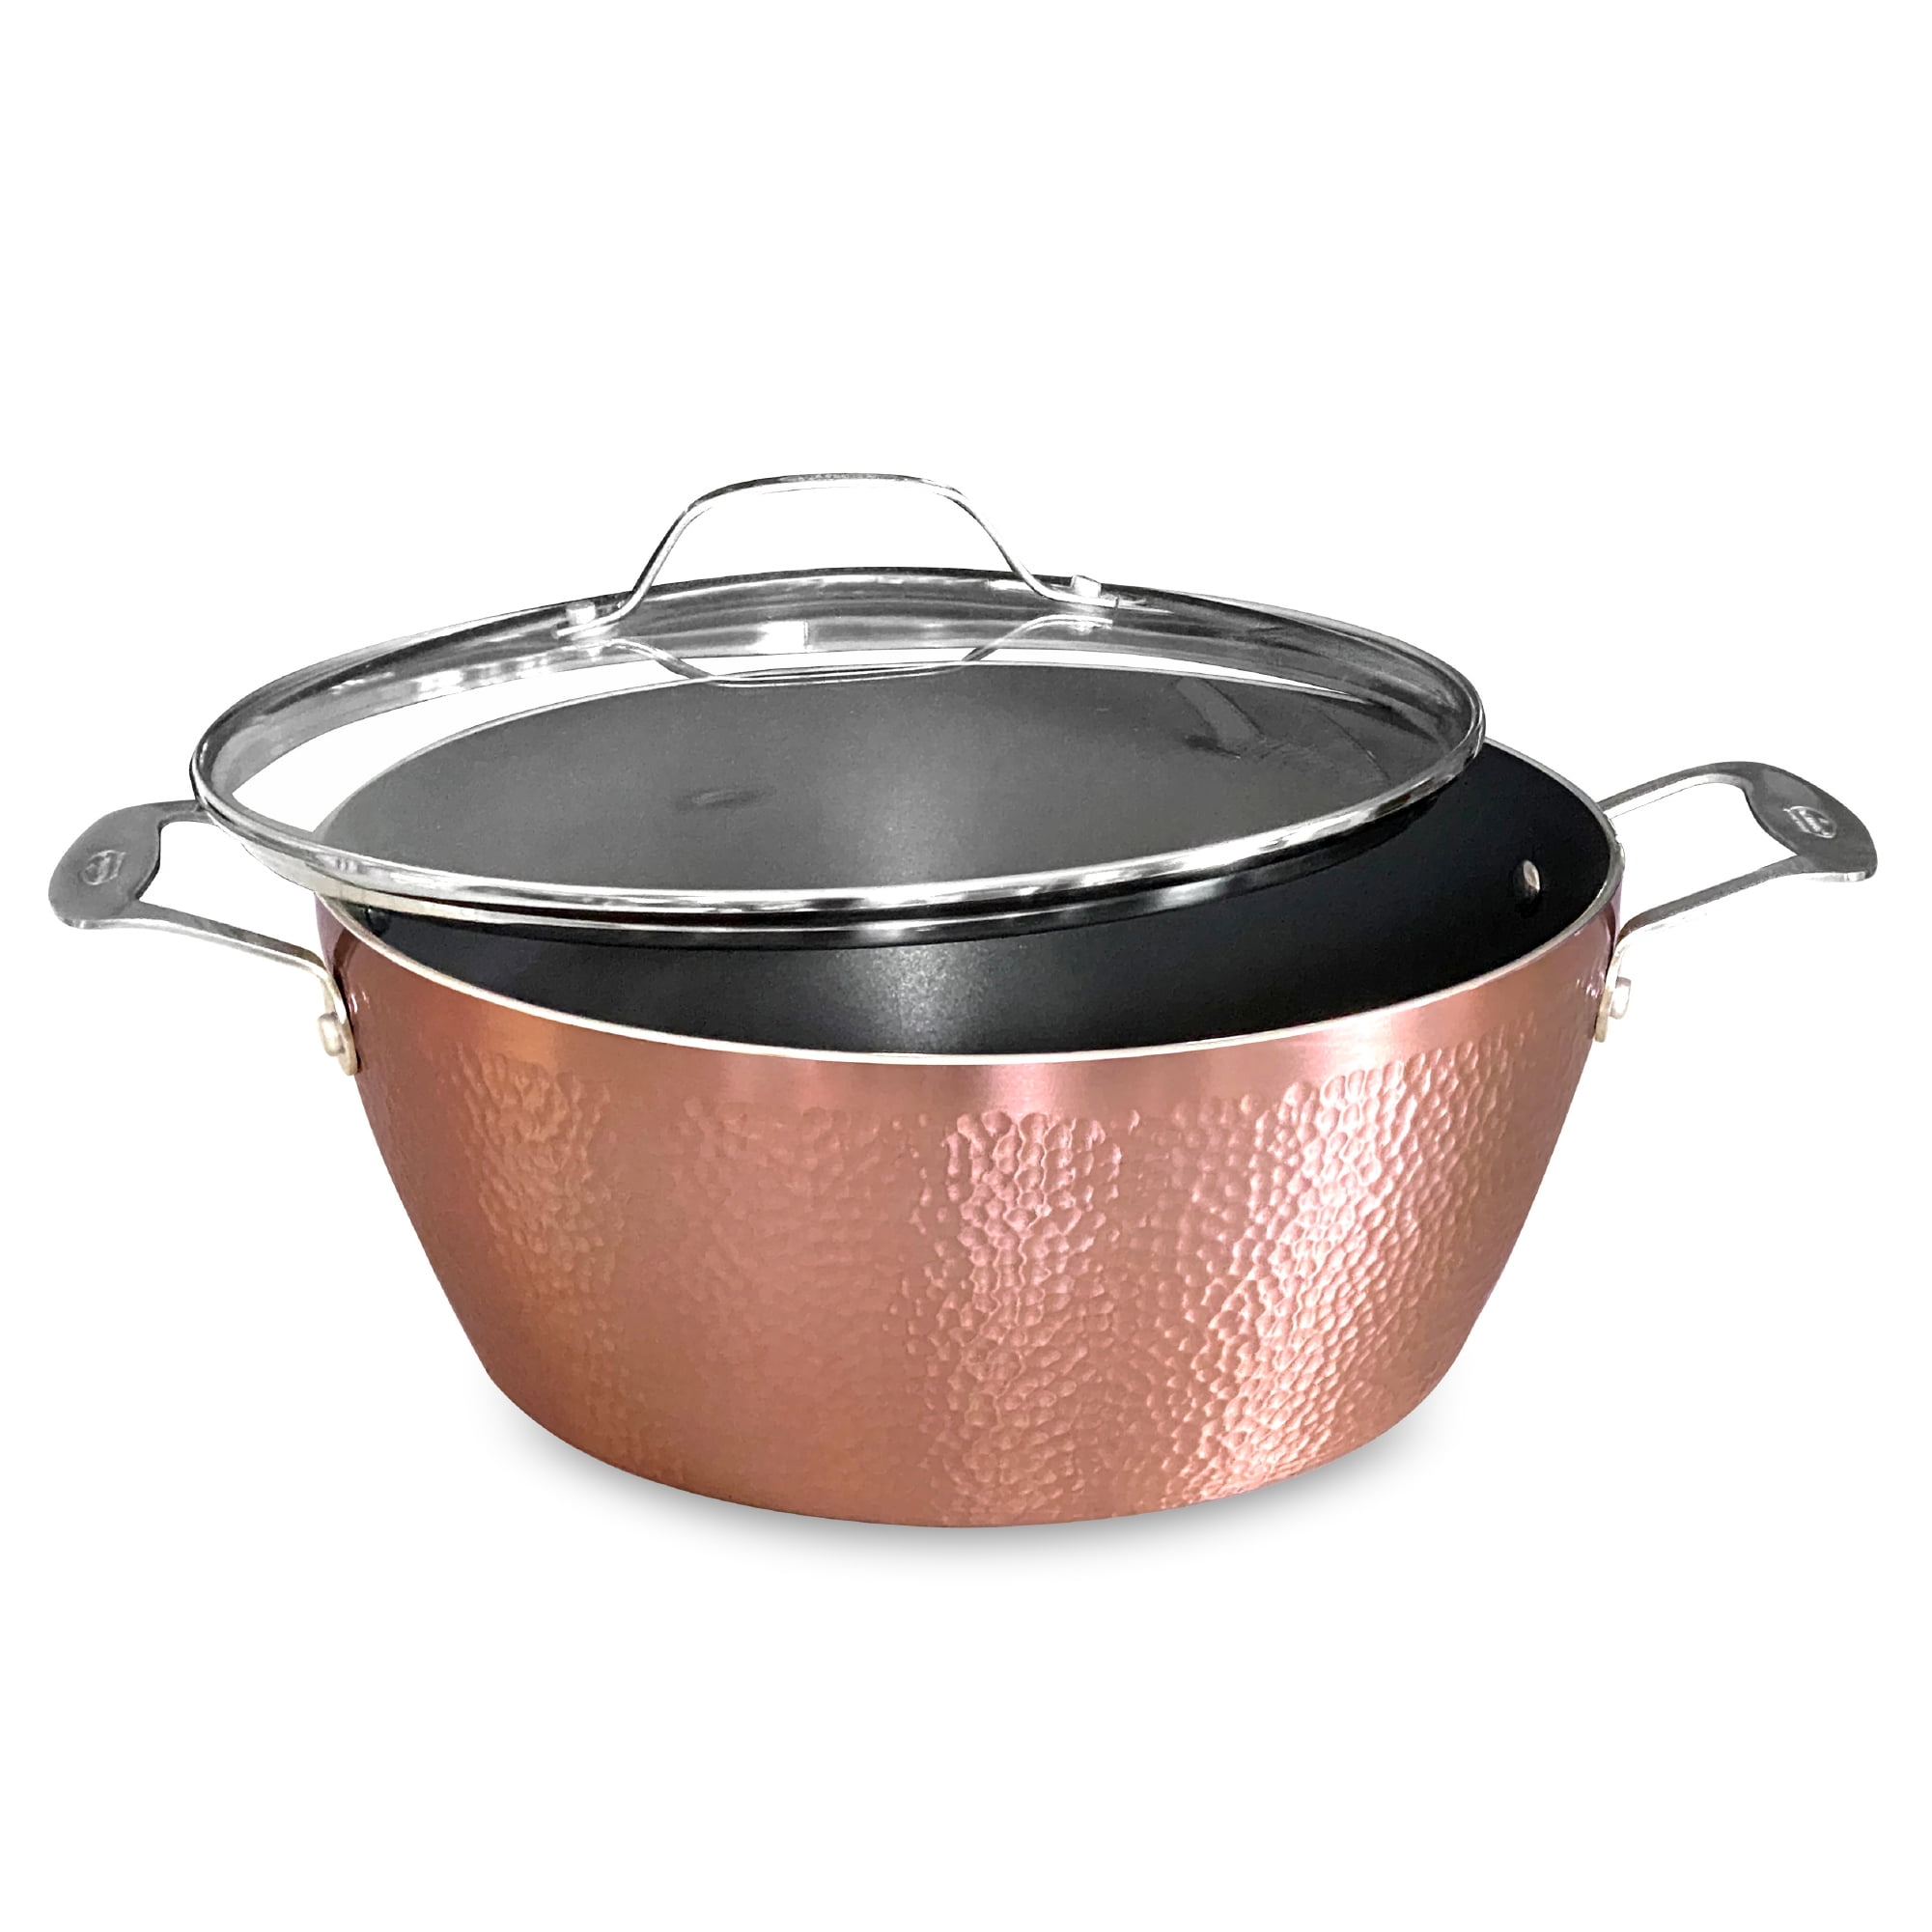 OrGREENiC 10 Piece Hammered Rose Gold - On Sale - Bed Bath & Beyond -  32877107